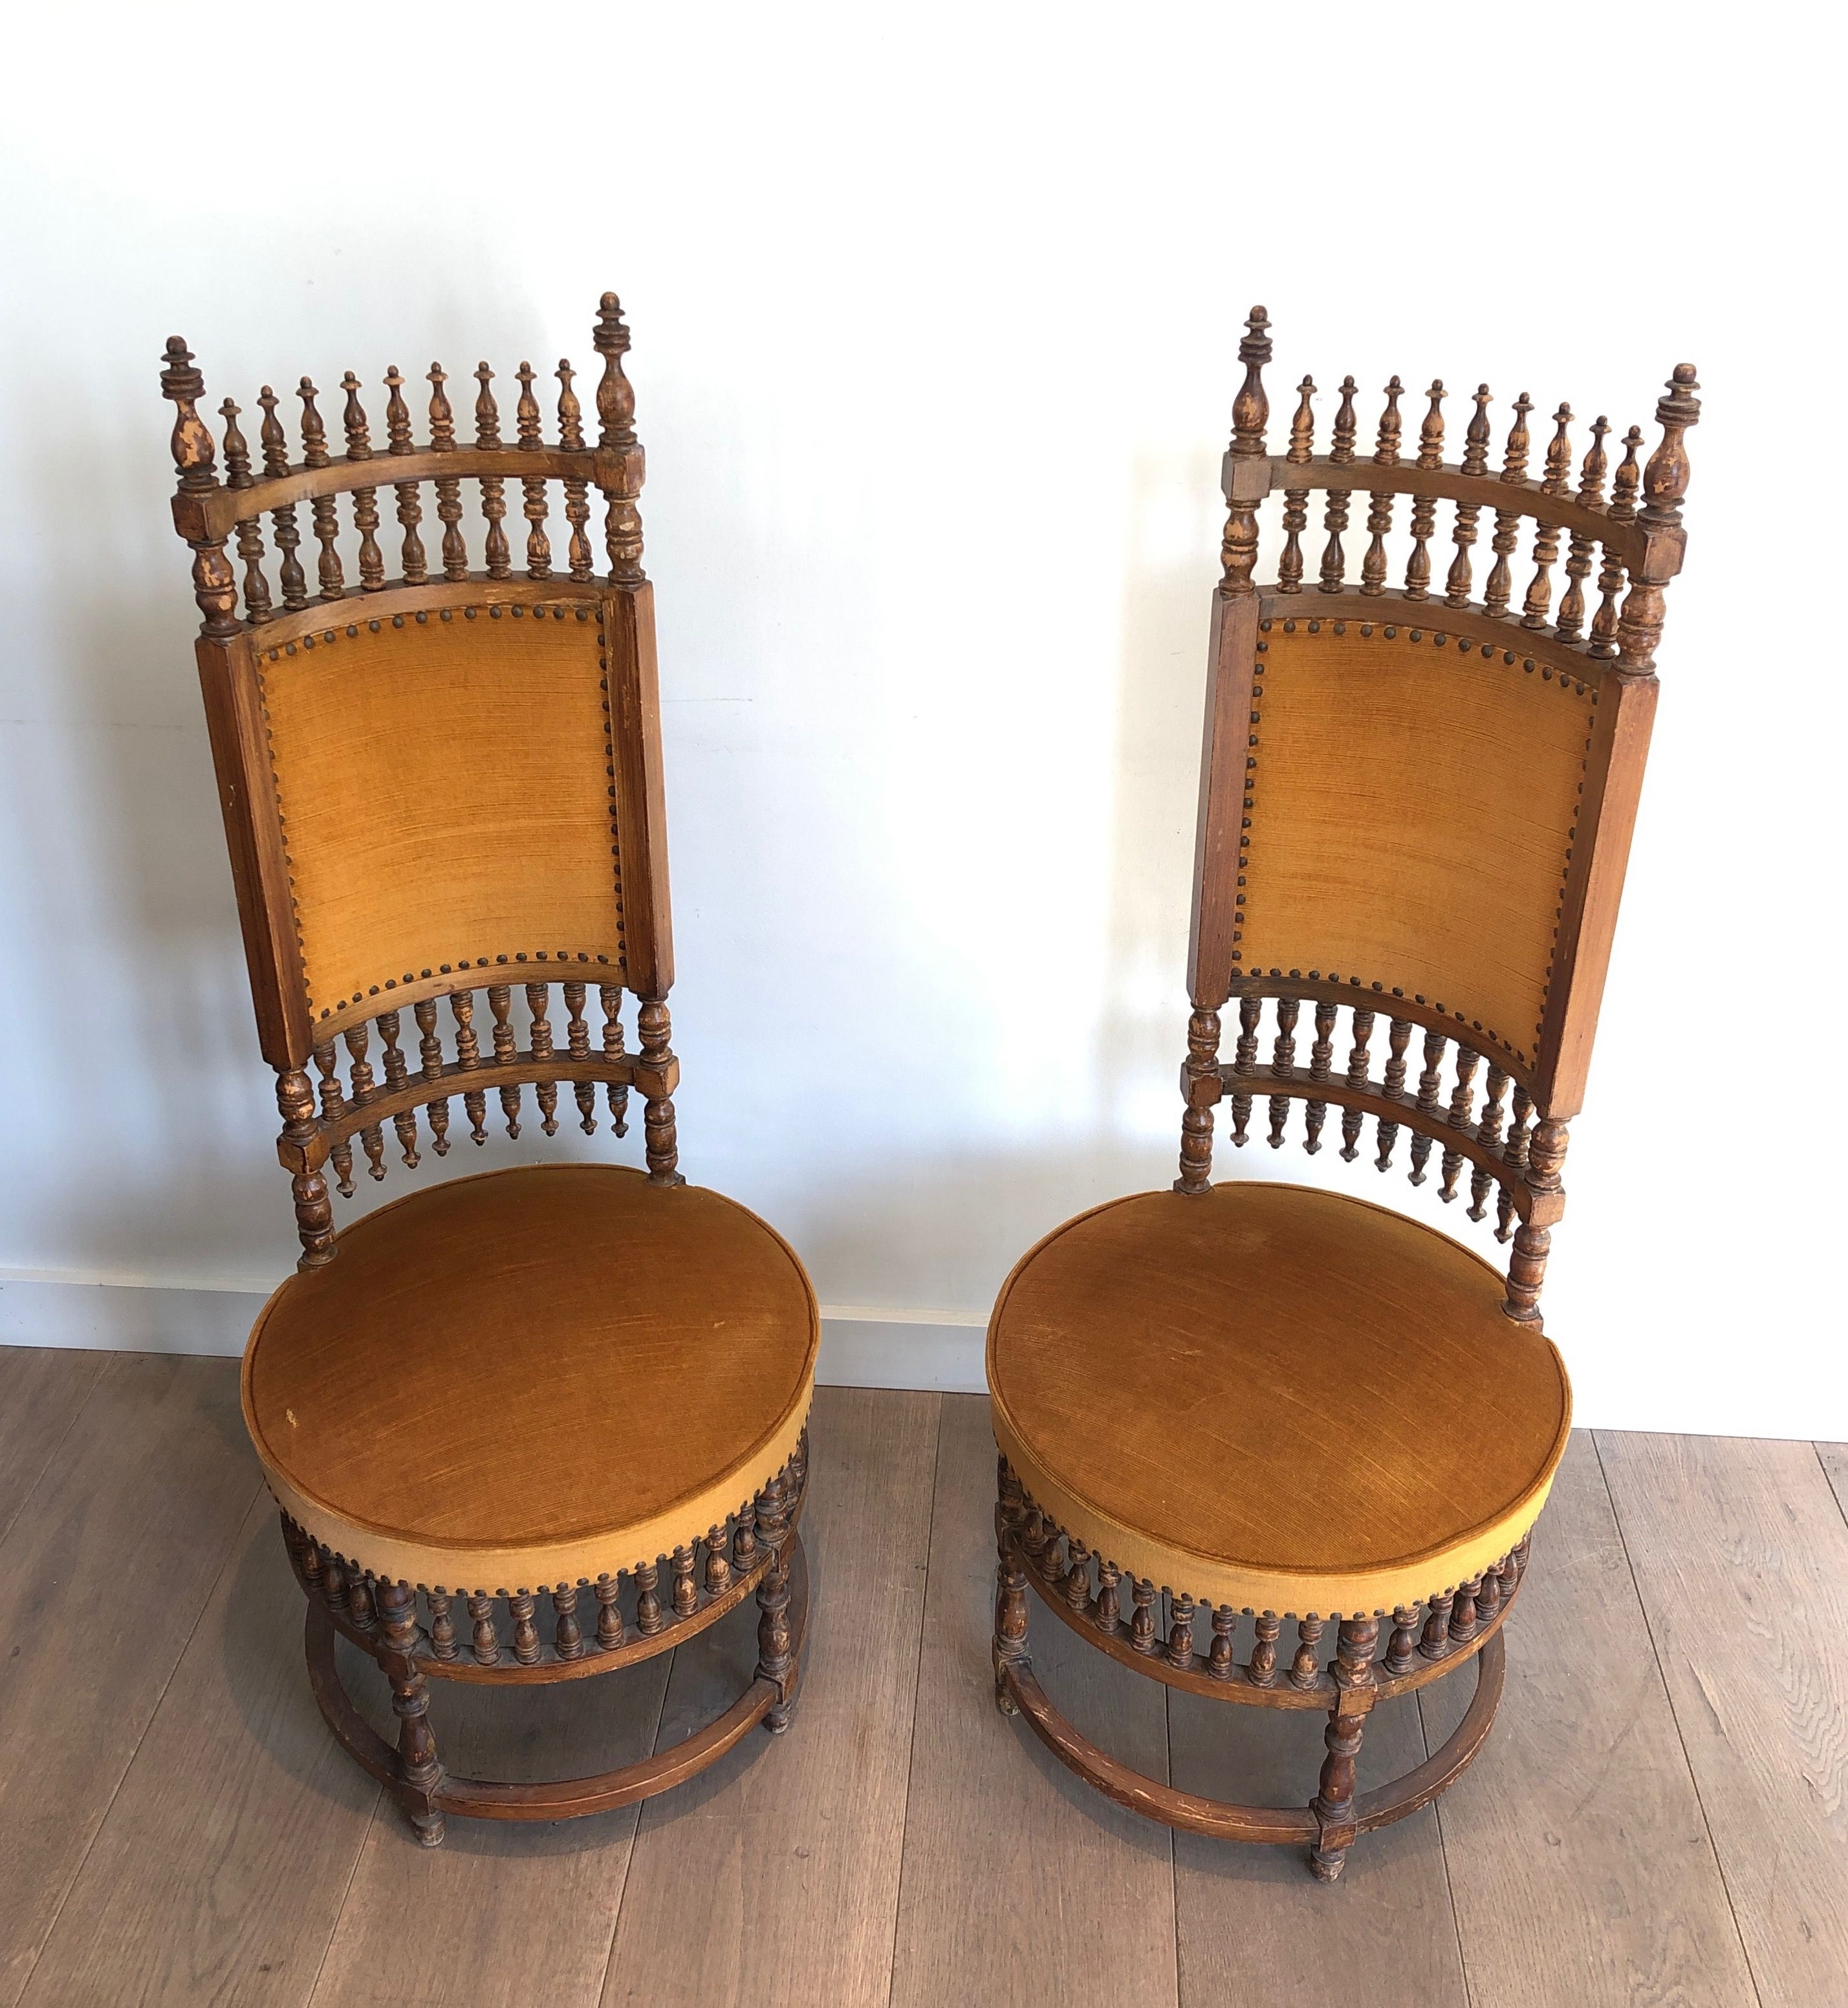 Pair of Art & Crafts Chairs